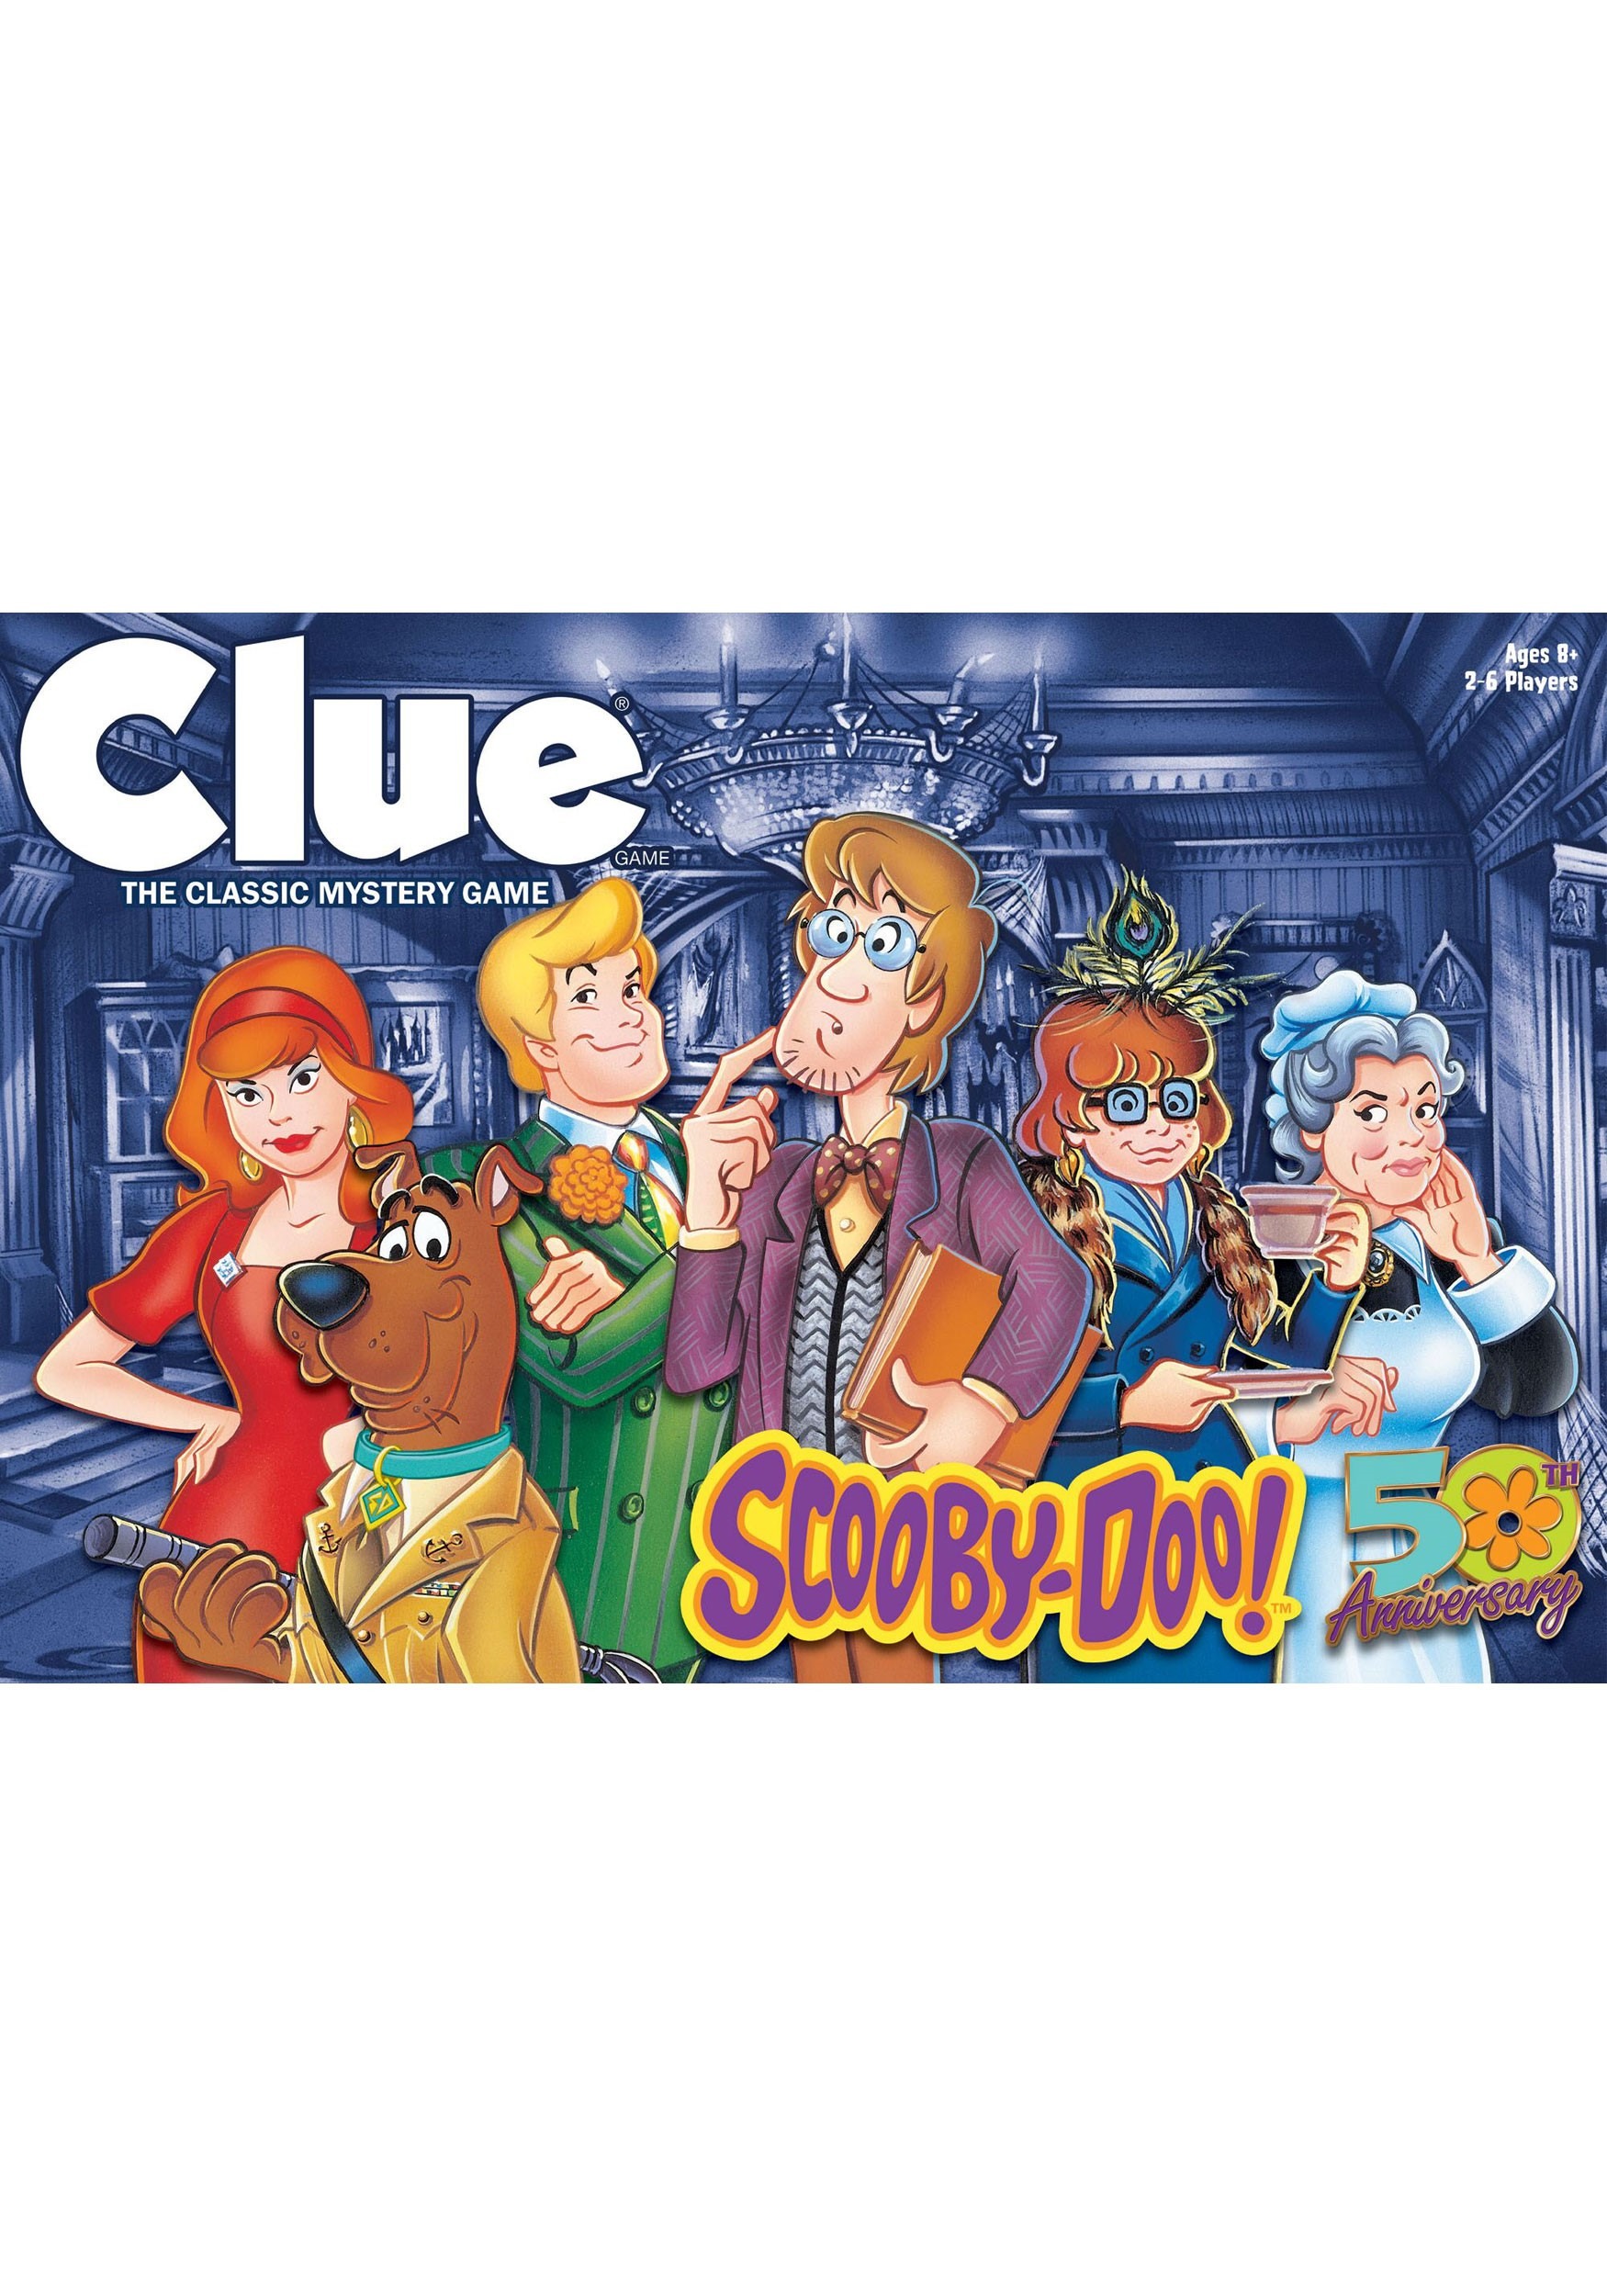 Scooby-Doo Clue Board Game